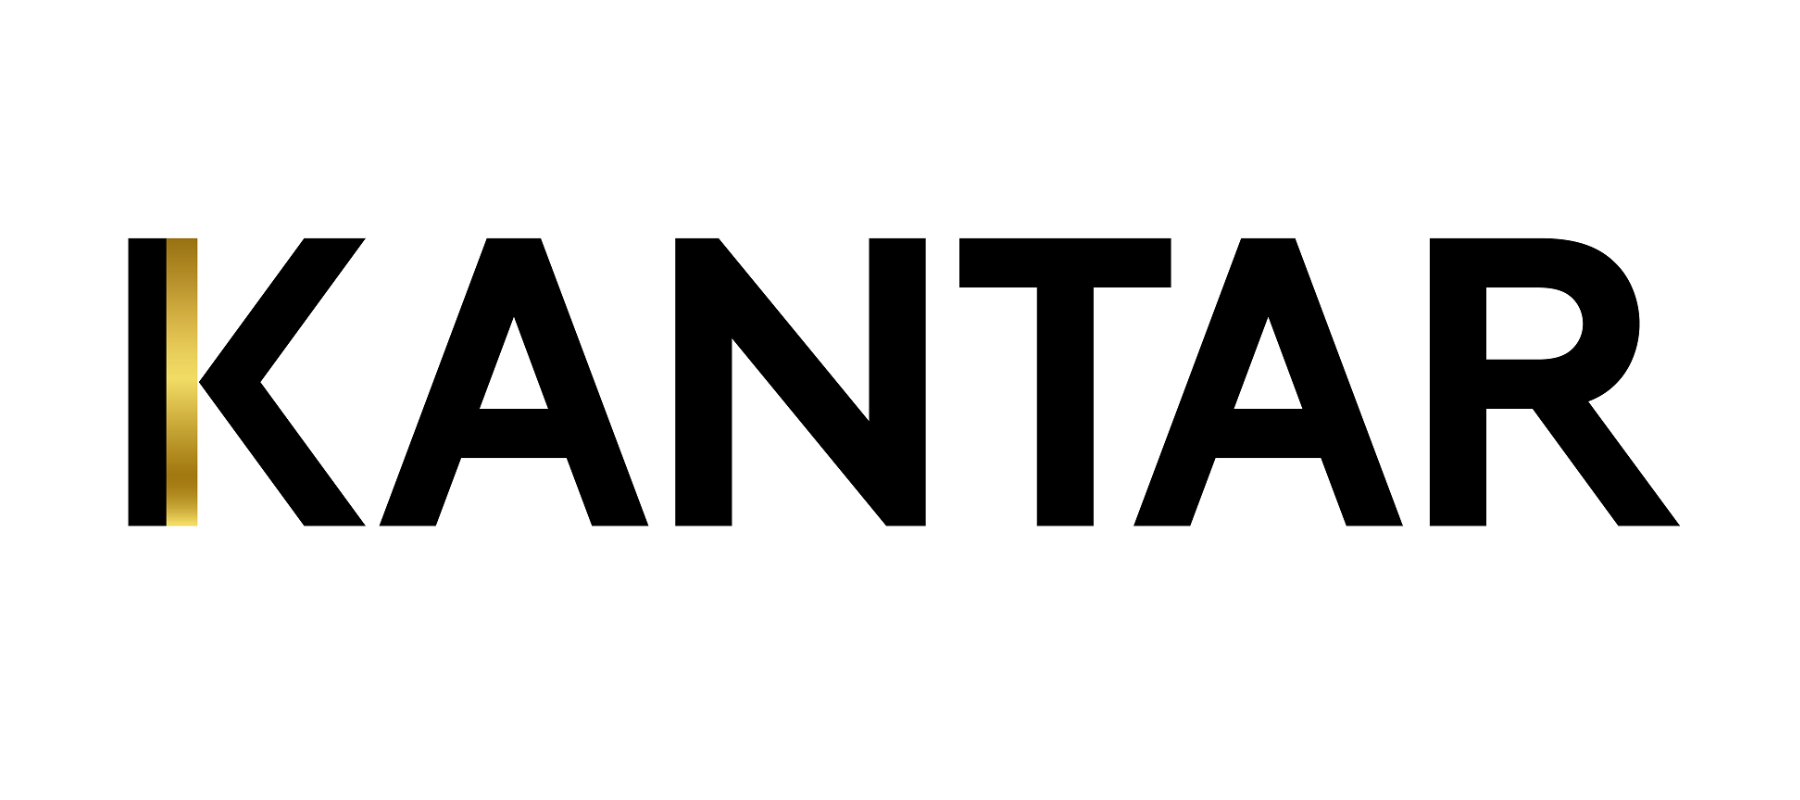 Kantar Media launches tool to guide ad campaigns decision making in Spain